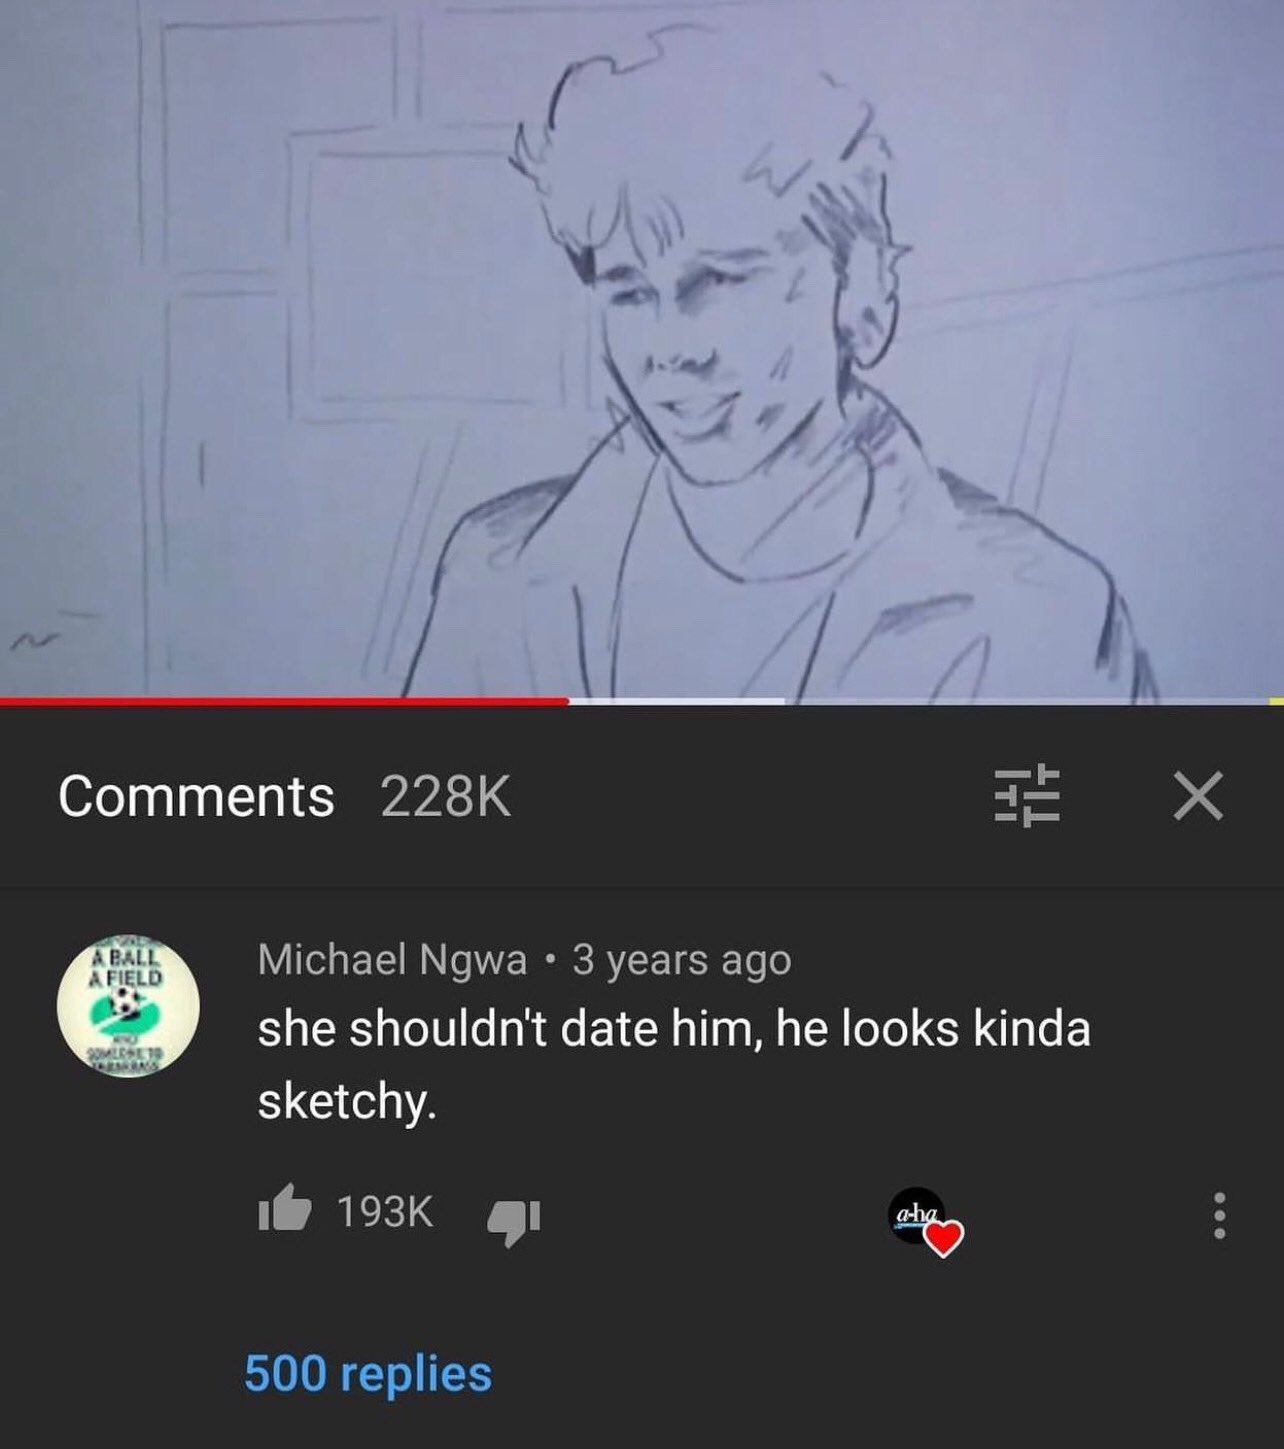 funny and savage youtube comments - cartoon - A Ball A Field Somlche 19 Trags Michael Ngwa 3 years ago she shouldn't date him, he looks kinda sketchy. Wi 500 replies aha X